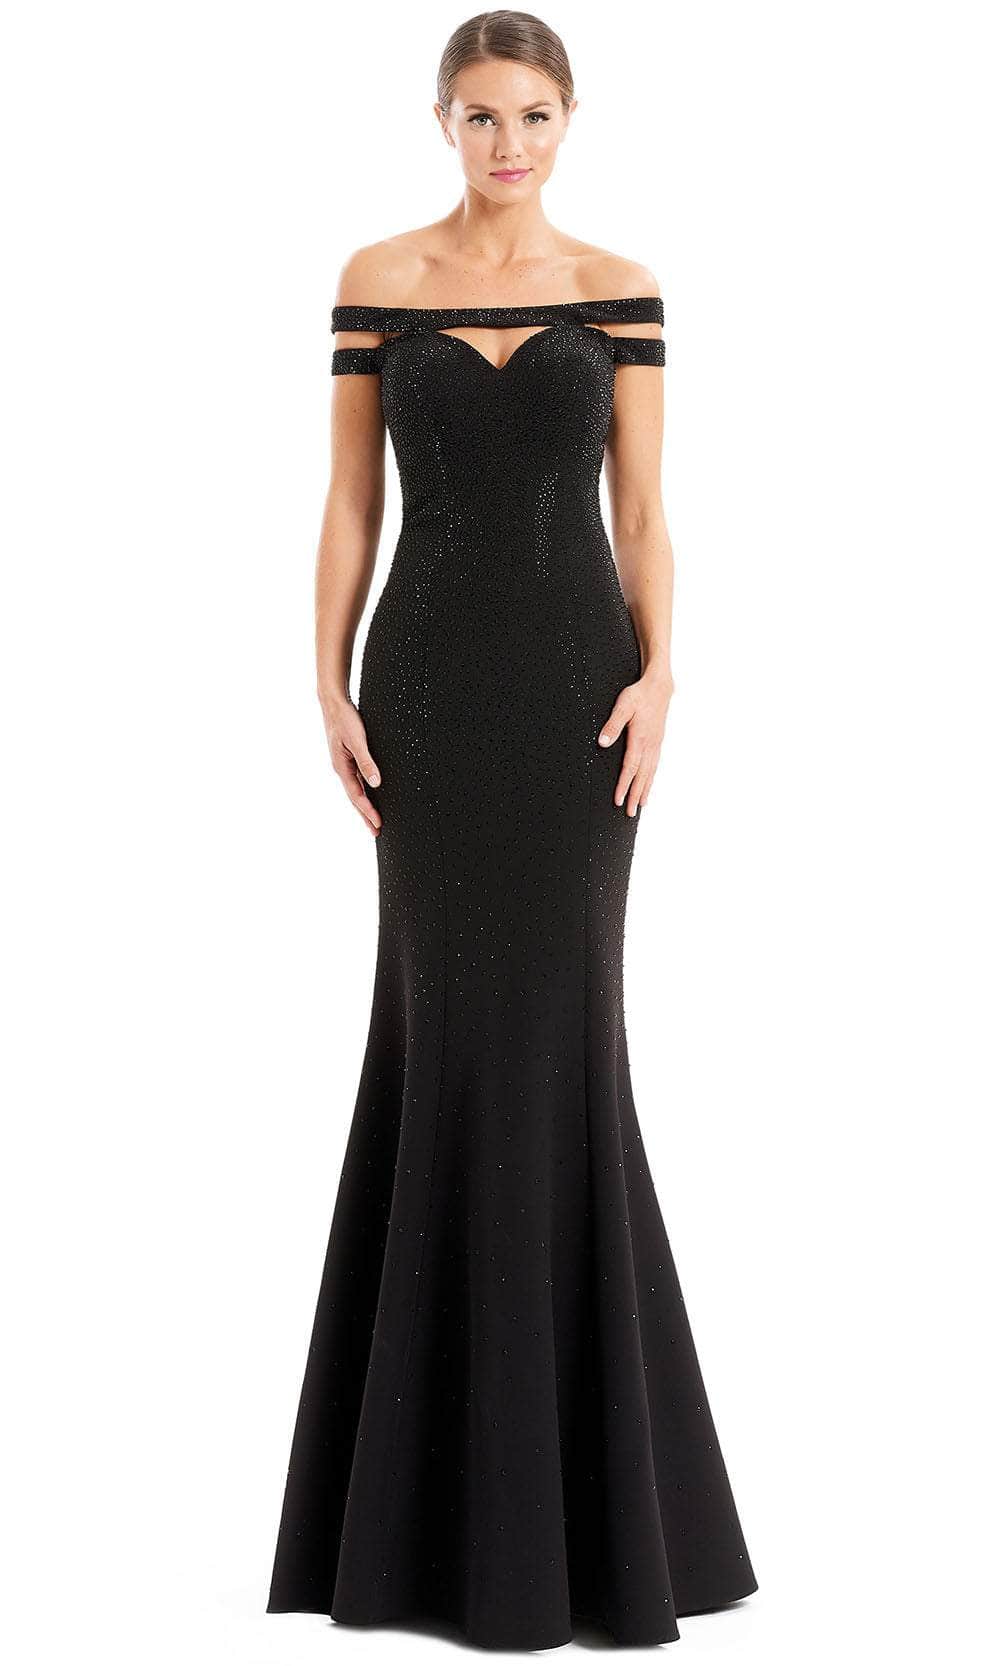 Alexander By Daymor 1679F22 - Off Shoulder Beaded Evening Gown Special Occasion Dress 4 / Black